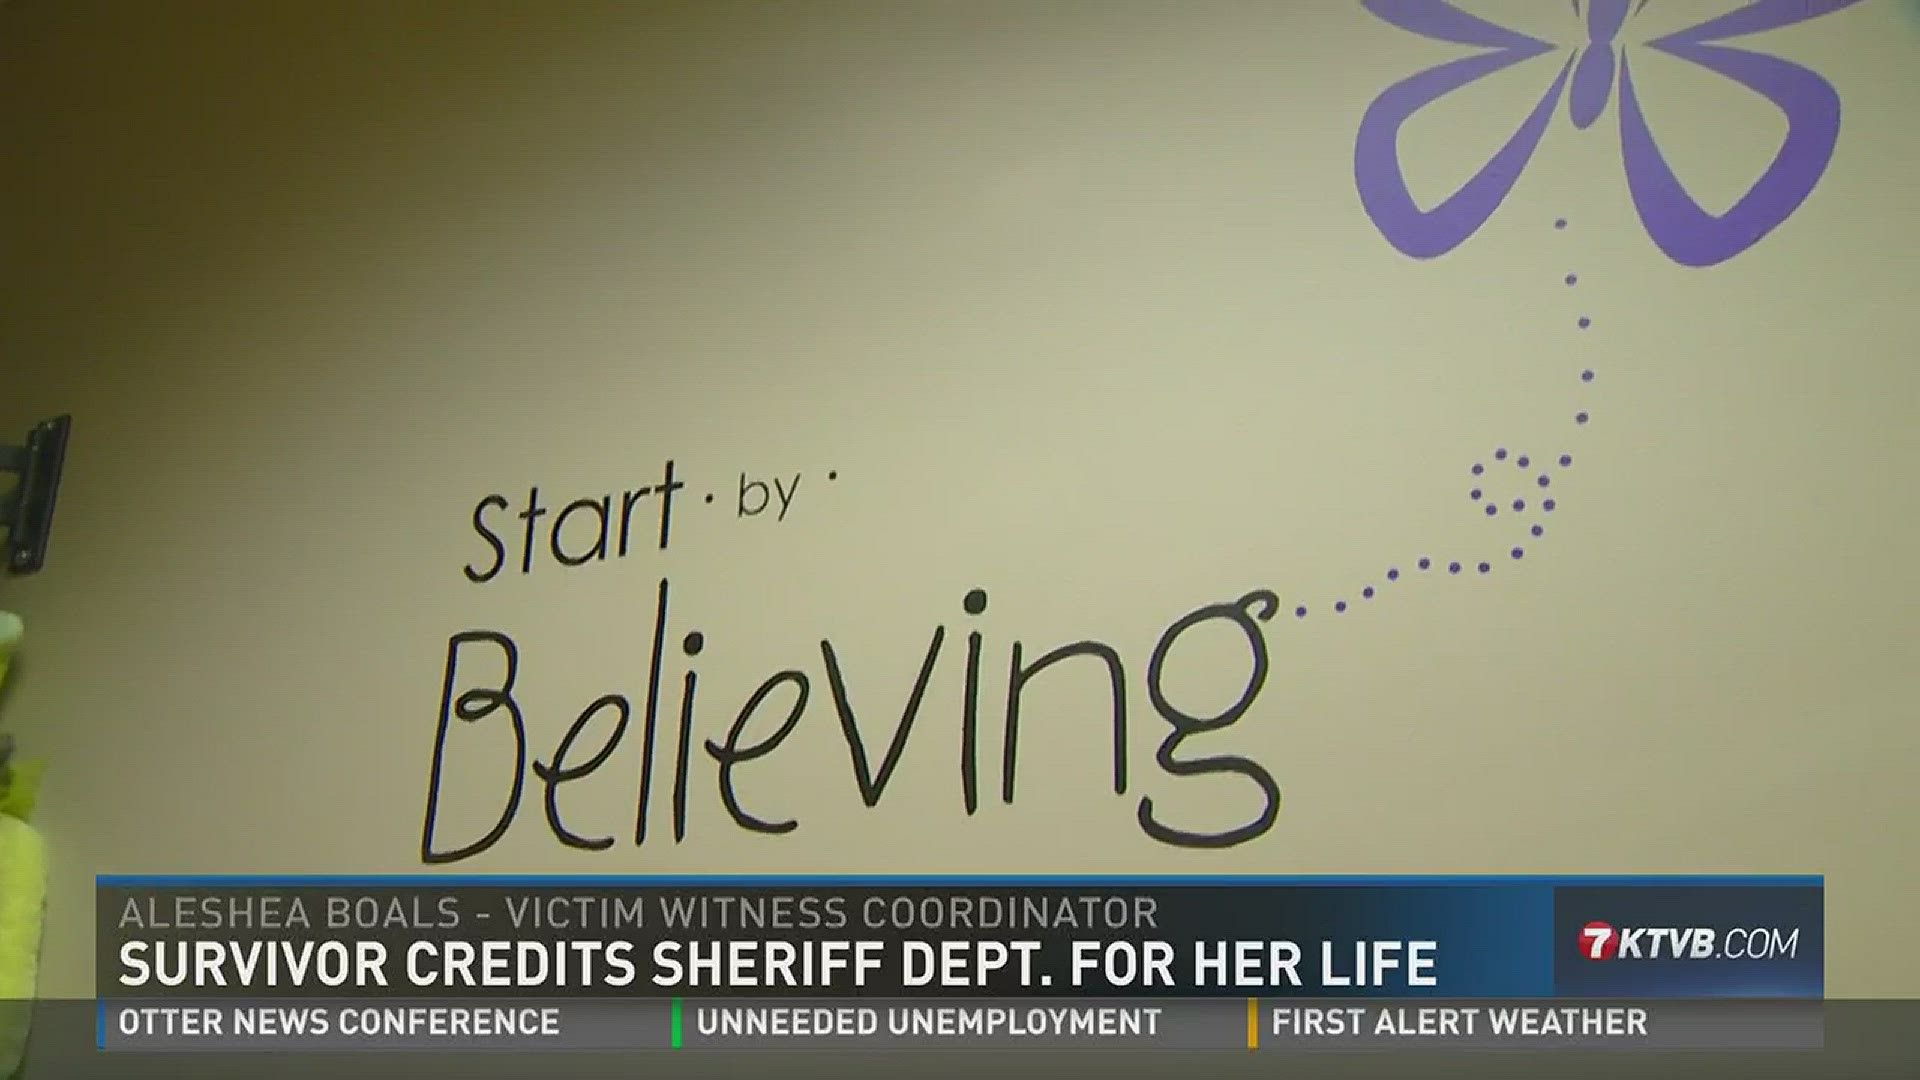 Survivor credits sheriff's office for her life.